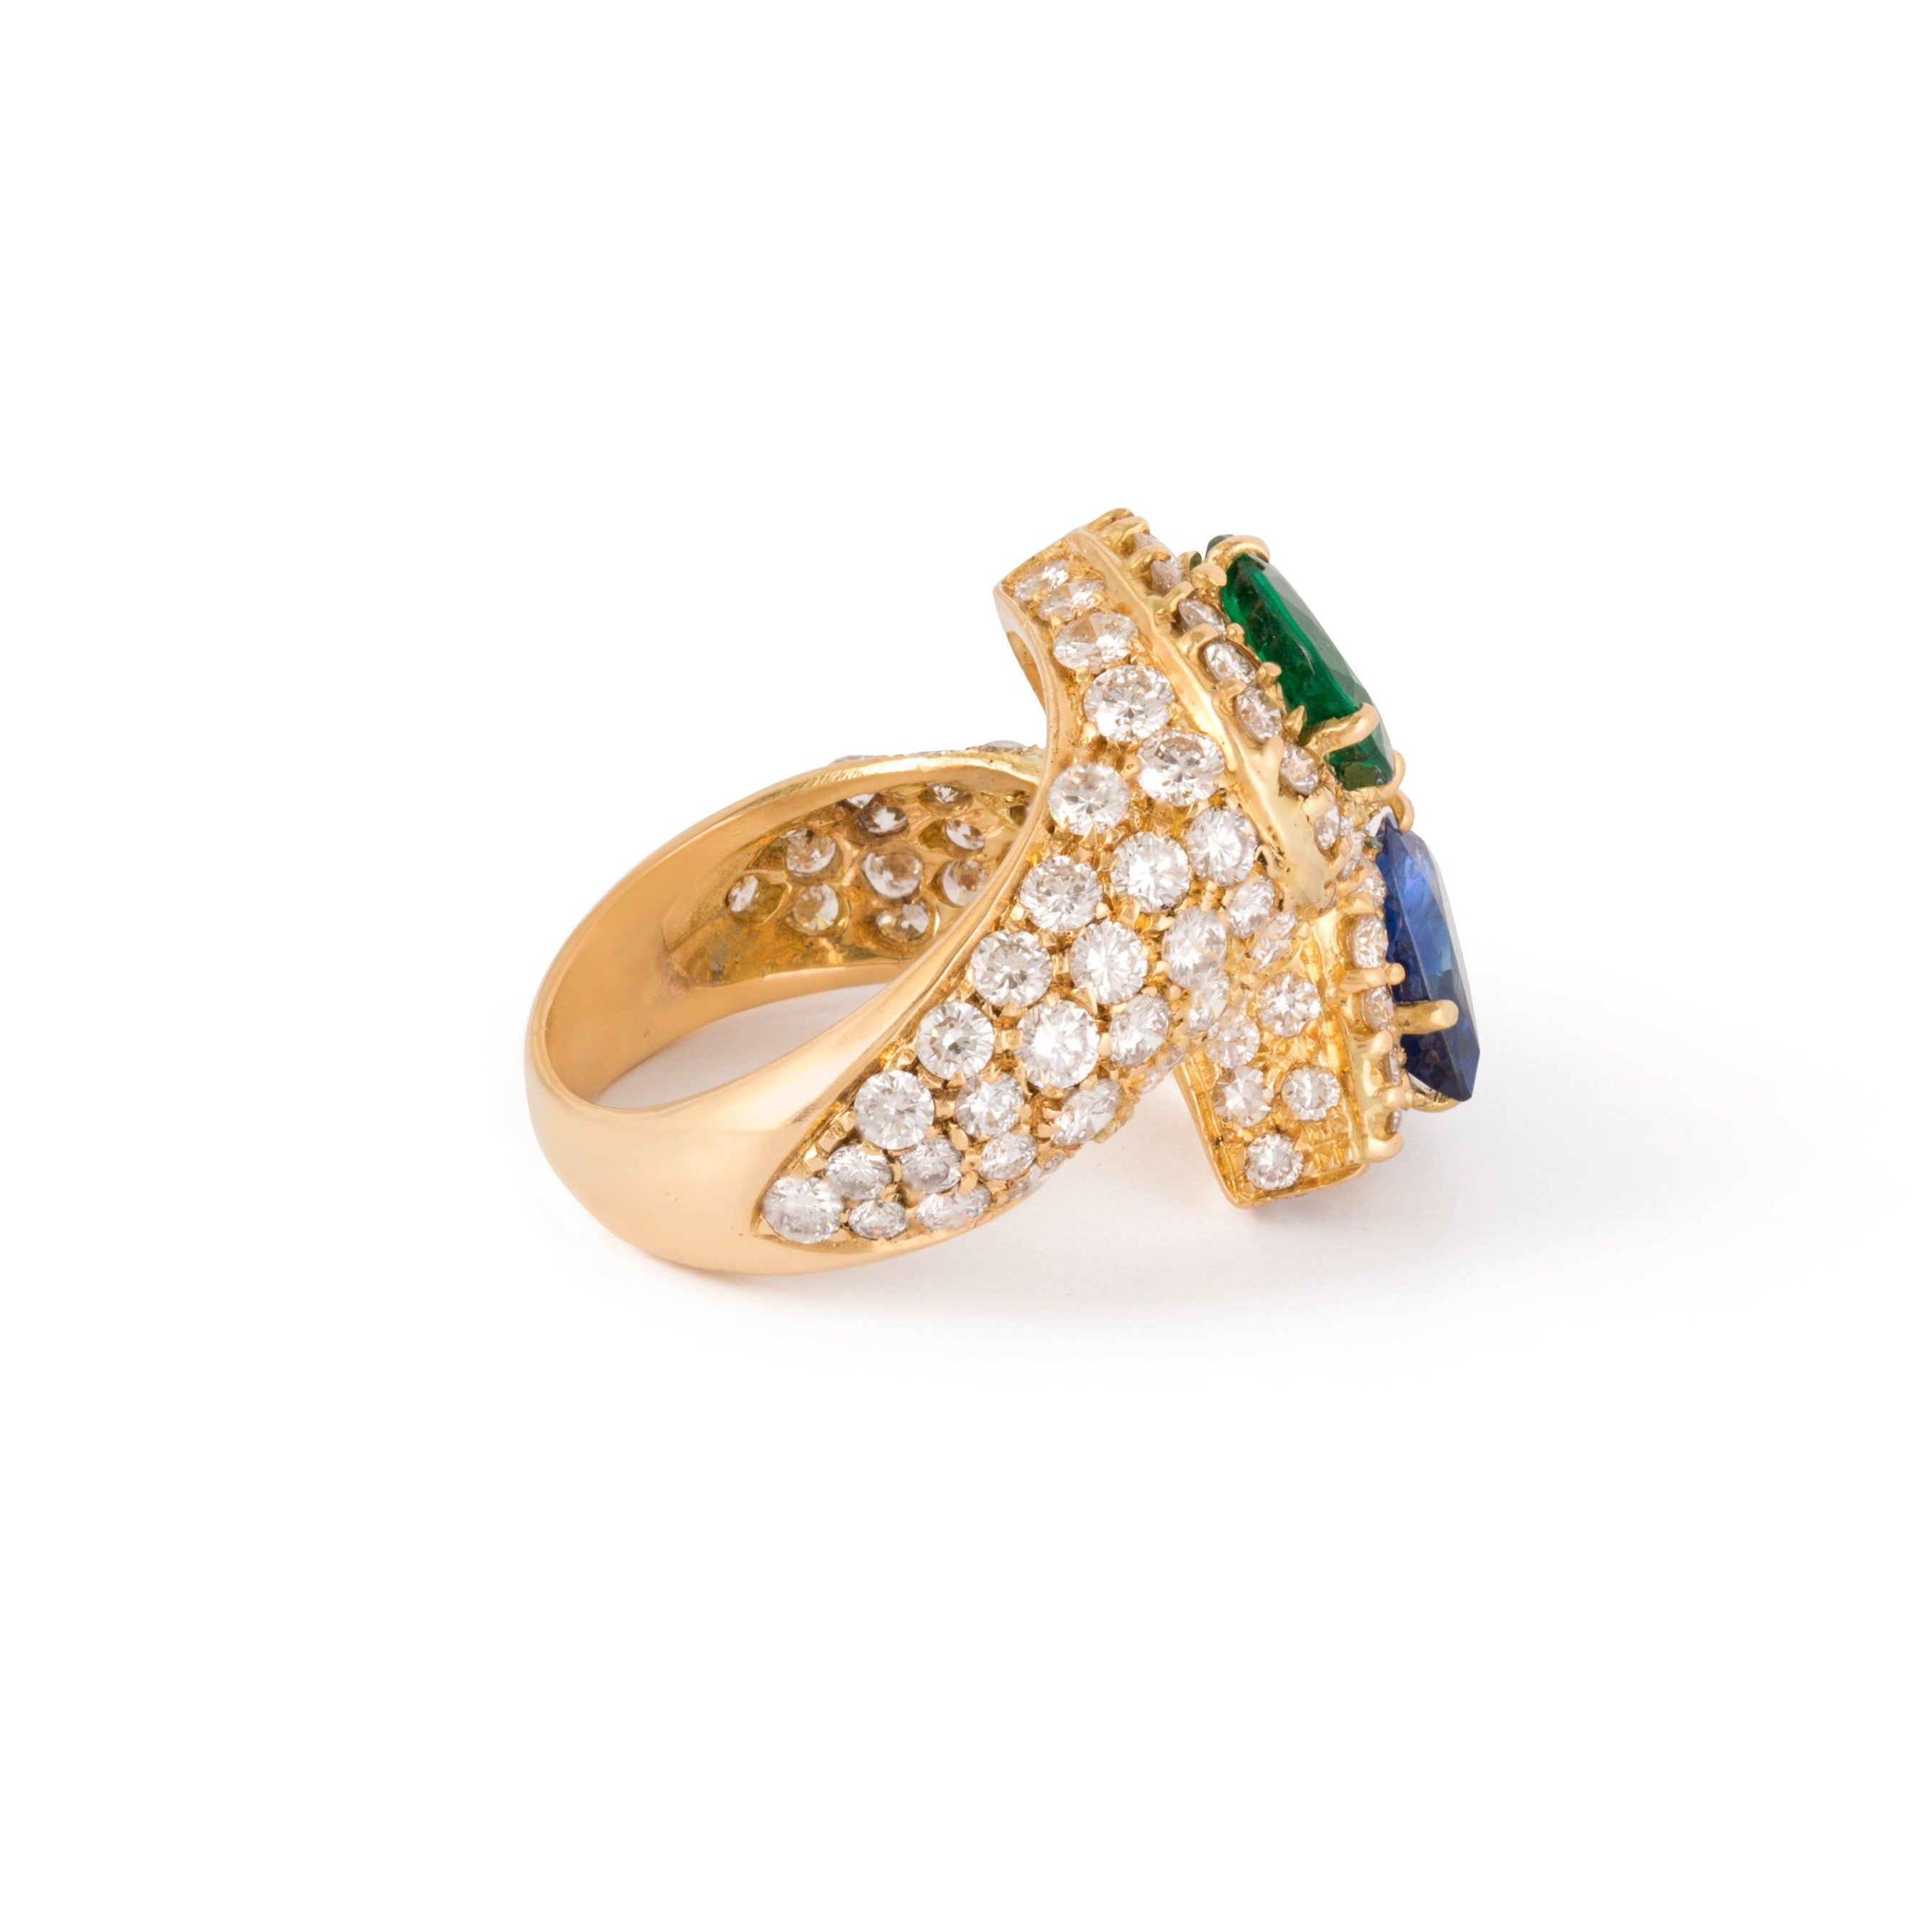 Emerald, Sapphire, Pave Diamonds, and 18k Gold Bypass Ring